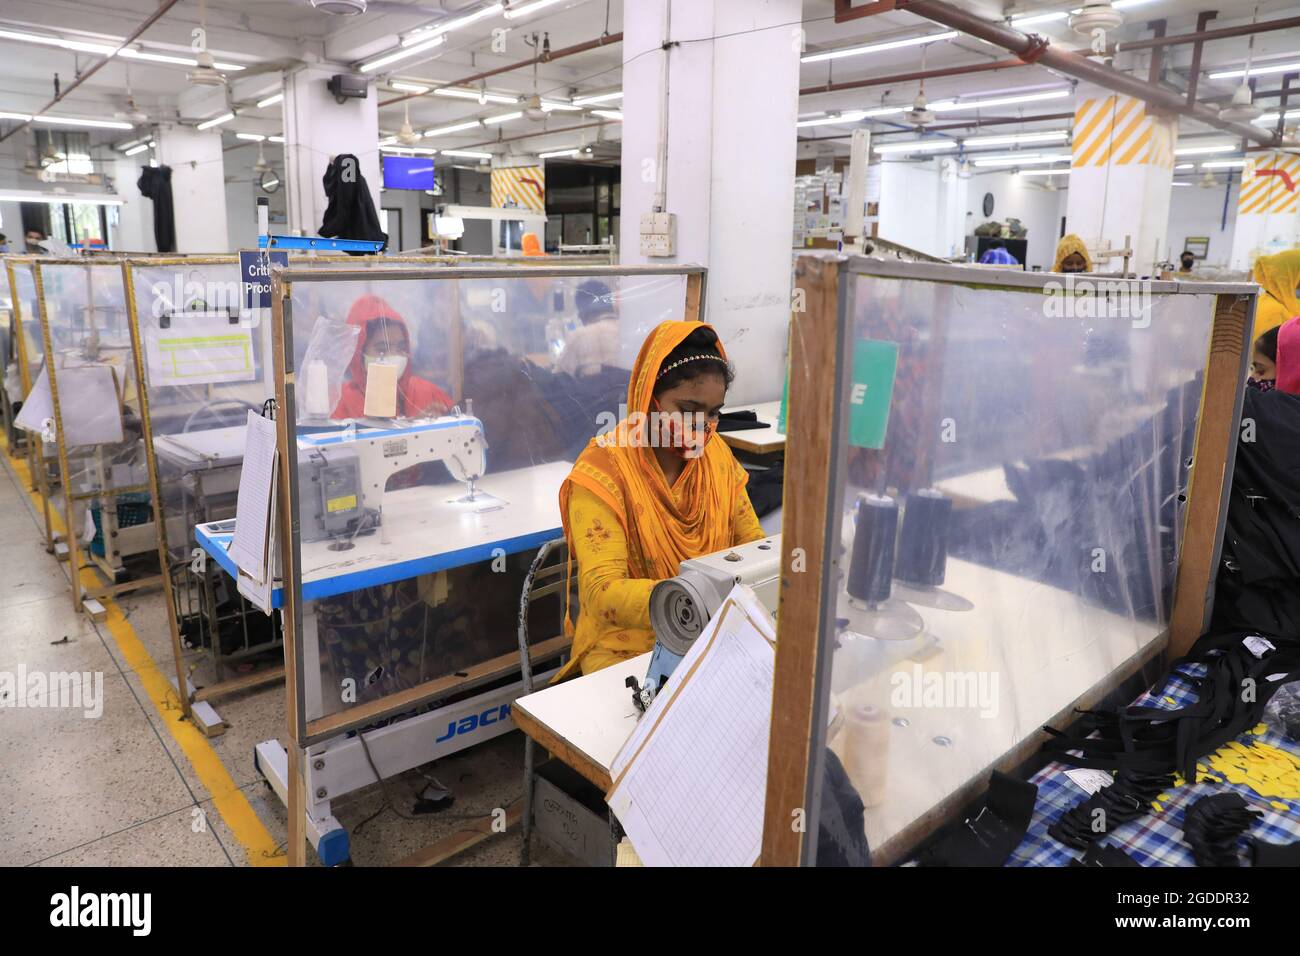 Dhaka, Bangladesh. August 12 2021: A woman manufactures clothes in a textile factory in the Gazipur industrial zone on the outskirts of Dhaka. Despite the lockdown measures, imposed across the country by the coronavirus, Bangladeshi textile factories have resumed production of clothing, which They supply the most important brands in the world and represent 84% of the country's total exports. Bangladesh is one of the largest textile exporters in the world employing more than 4 million people, most of them women. Credit: Pacific Press Media Production Corp./Alamy Live News Stock Photo